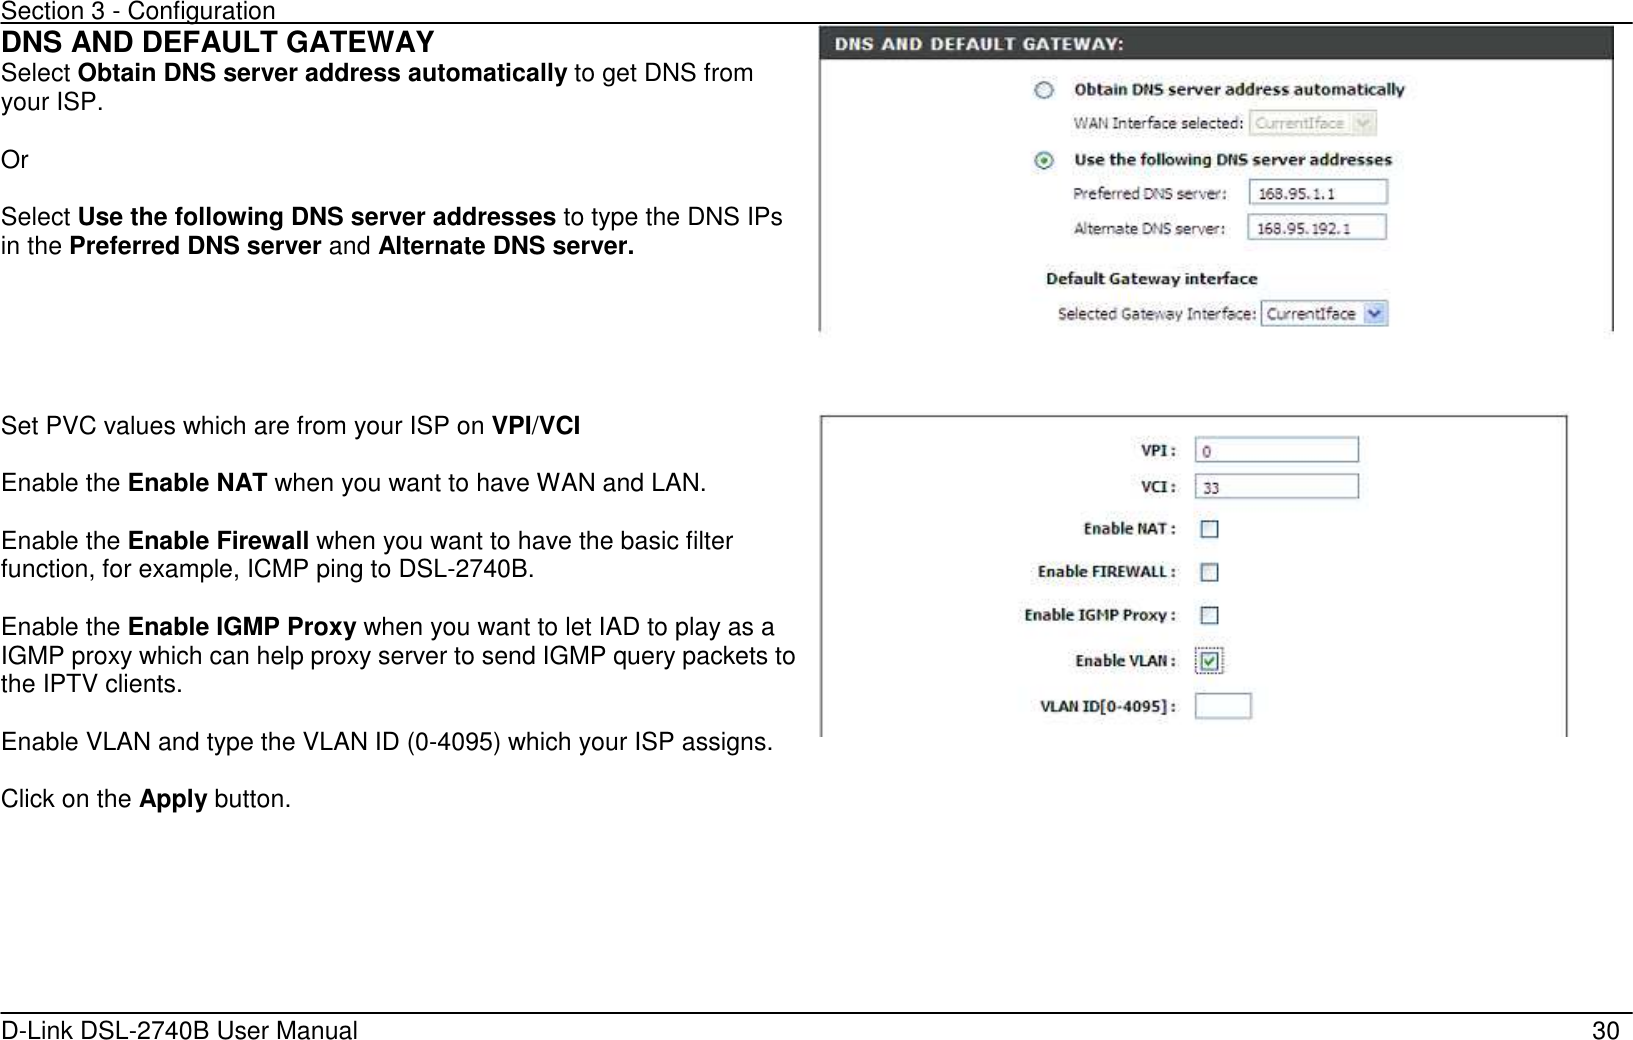 Section 3 - Configuration   D-Link DSL-2740B User Manual                                                  30 DNS AND DEFAULT GATEWAY Select Obtain DNS server address automatically to get DNS from your ISP.  Or    Select Use the following DNS server addresses to type the DNS IPs in the Preferred DNS server and Alternate DNS server.      Set PVC values which are from your ISP on VPI/VCI    Enable the Enable NAT when you want to have WAN and LAN.  Enable the Enable Firewall when you want to have the basic filter function, for example, ICMP ping to DSL-2740B.  Enable the Enable IGMP Proxy when you want to let IAD to play as a IGMP proxy which can help proxy server to send IGMP query packets to the IPTV clients.  Enable VLAN and type the VLAN ID (0-4095) which your ISP assigns.  Click on the Apply button.      